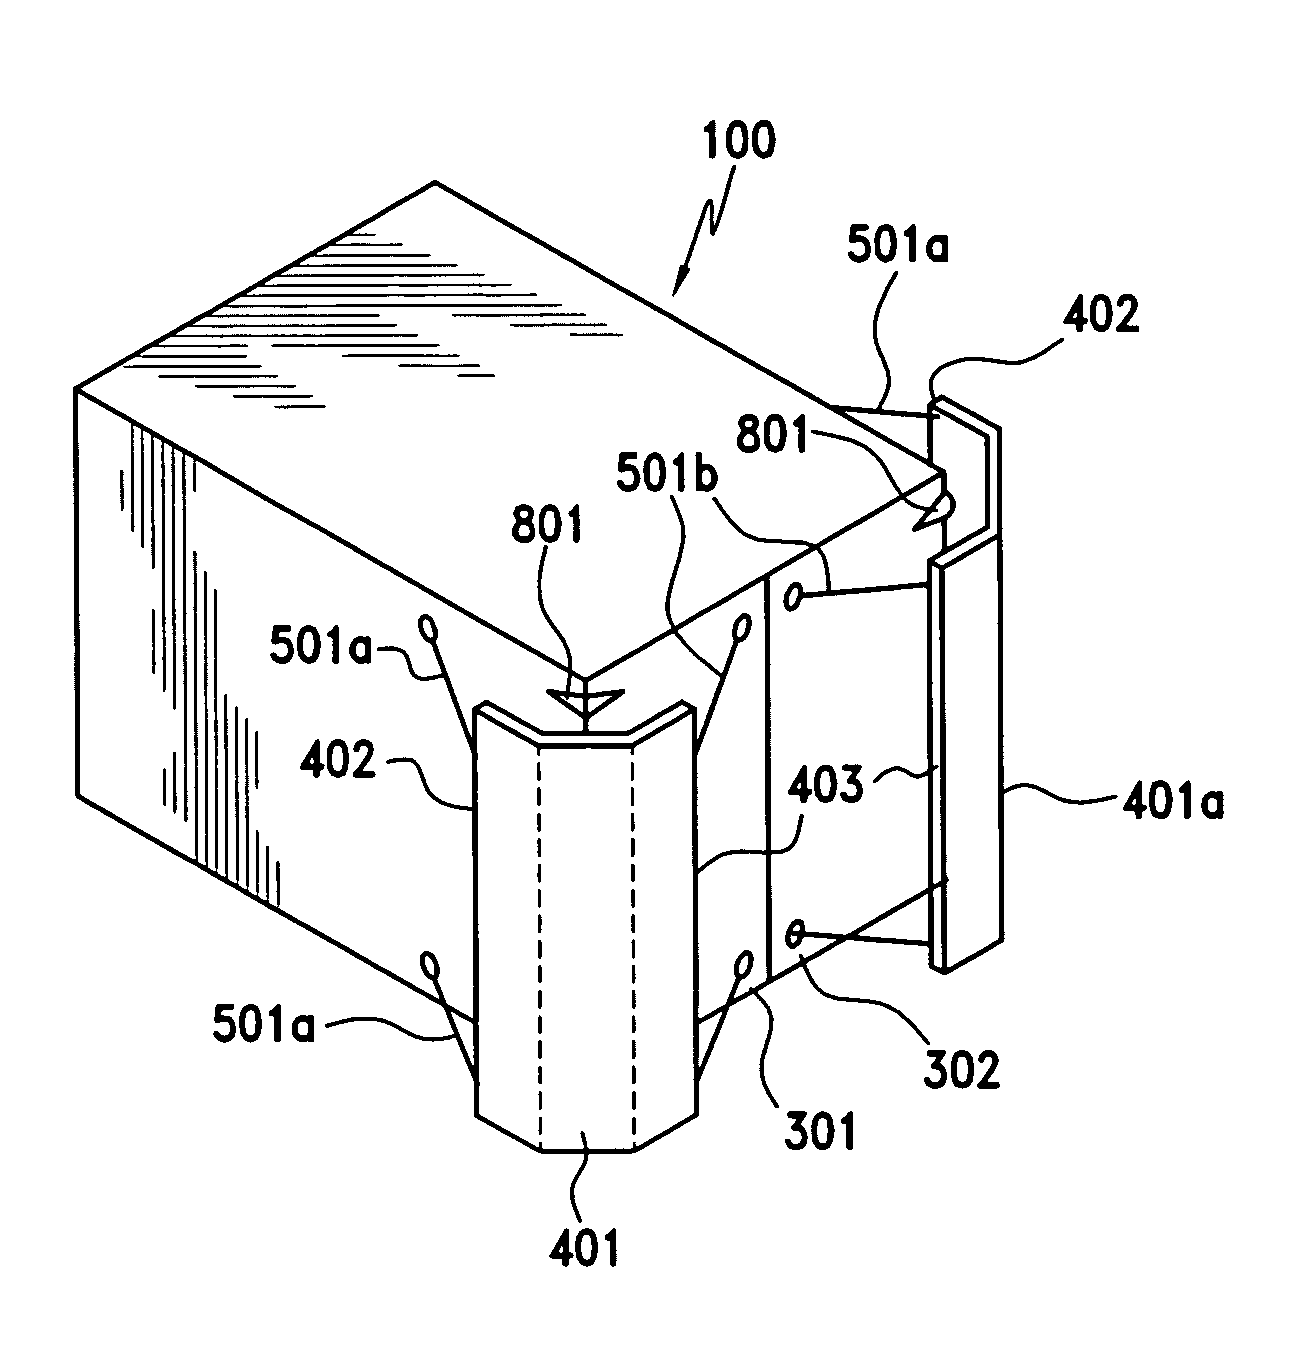 Apparatus for reducing drag on unpowered vehicles